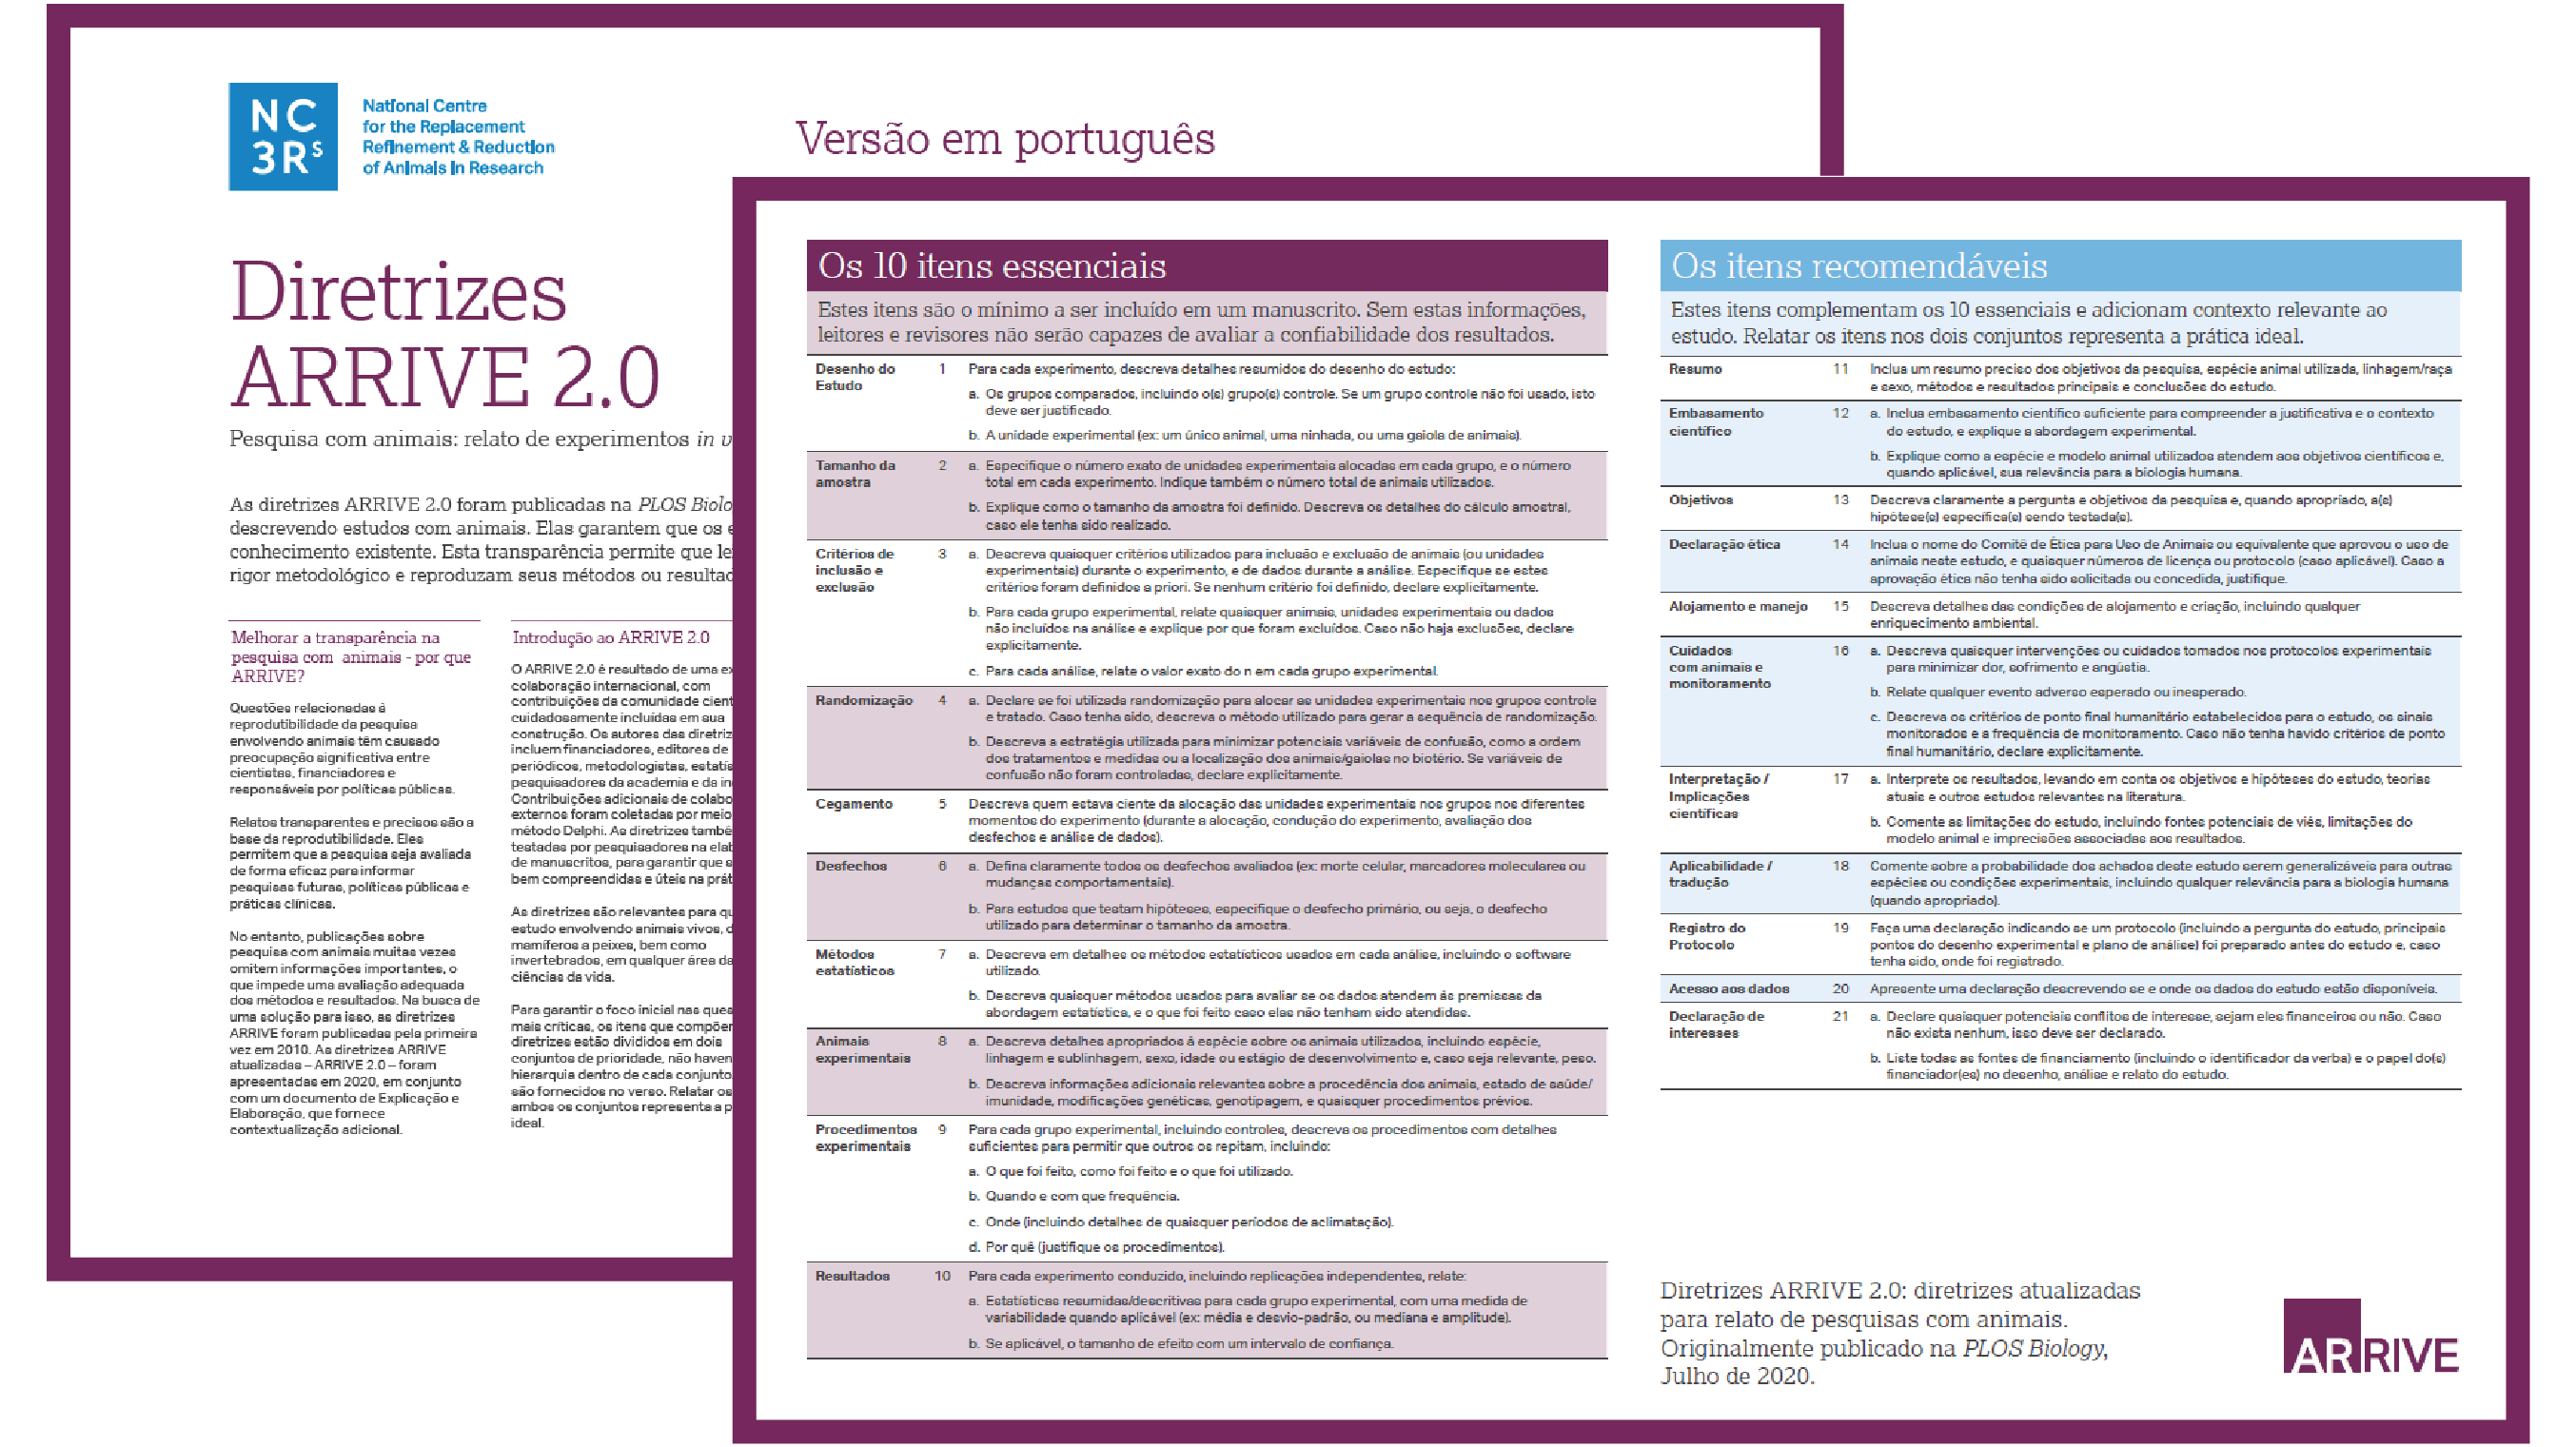 Portugese Guidelines